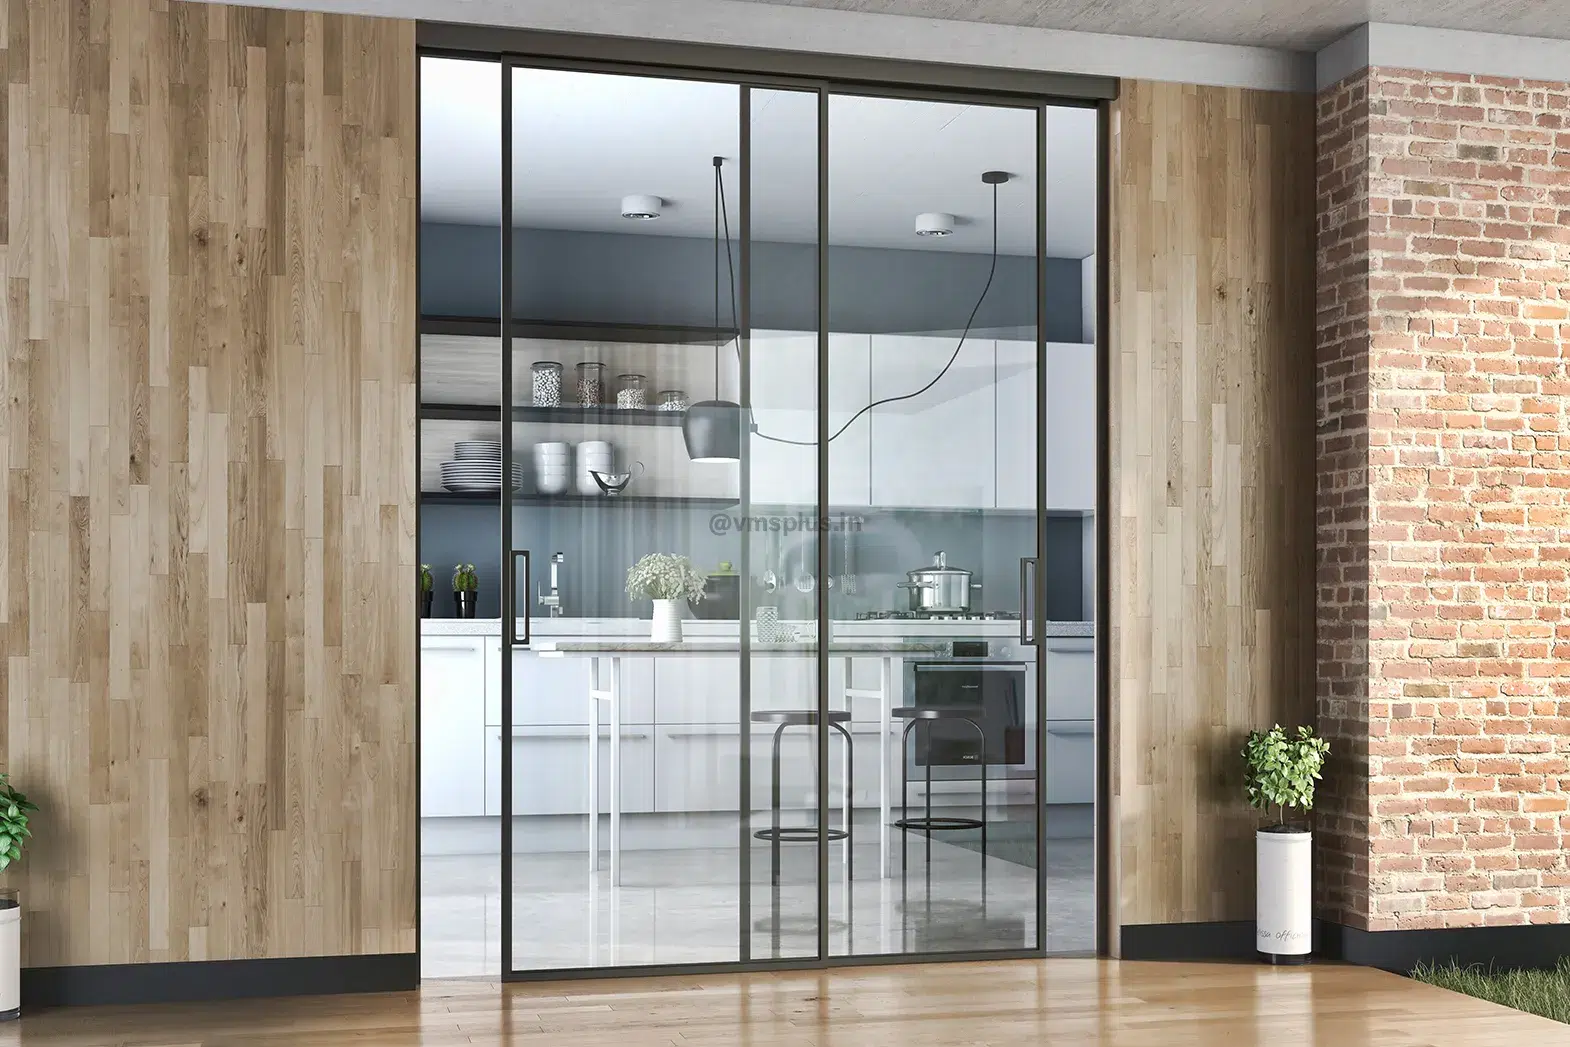 What Are Some Places Where You Can Use Glass Partitions?